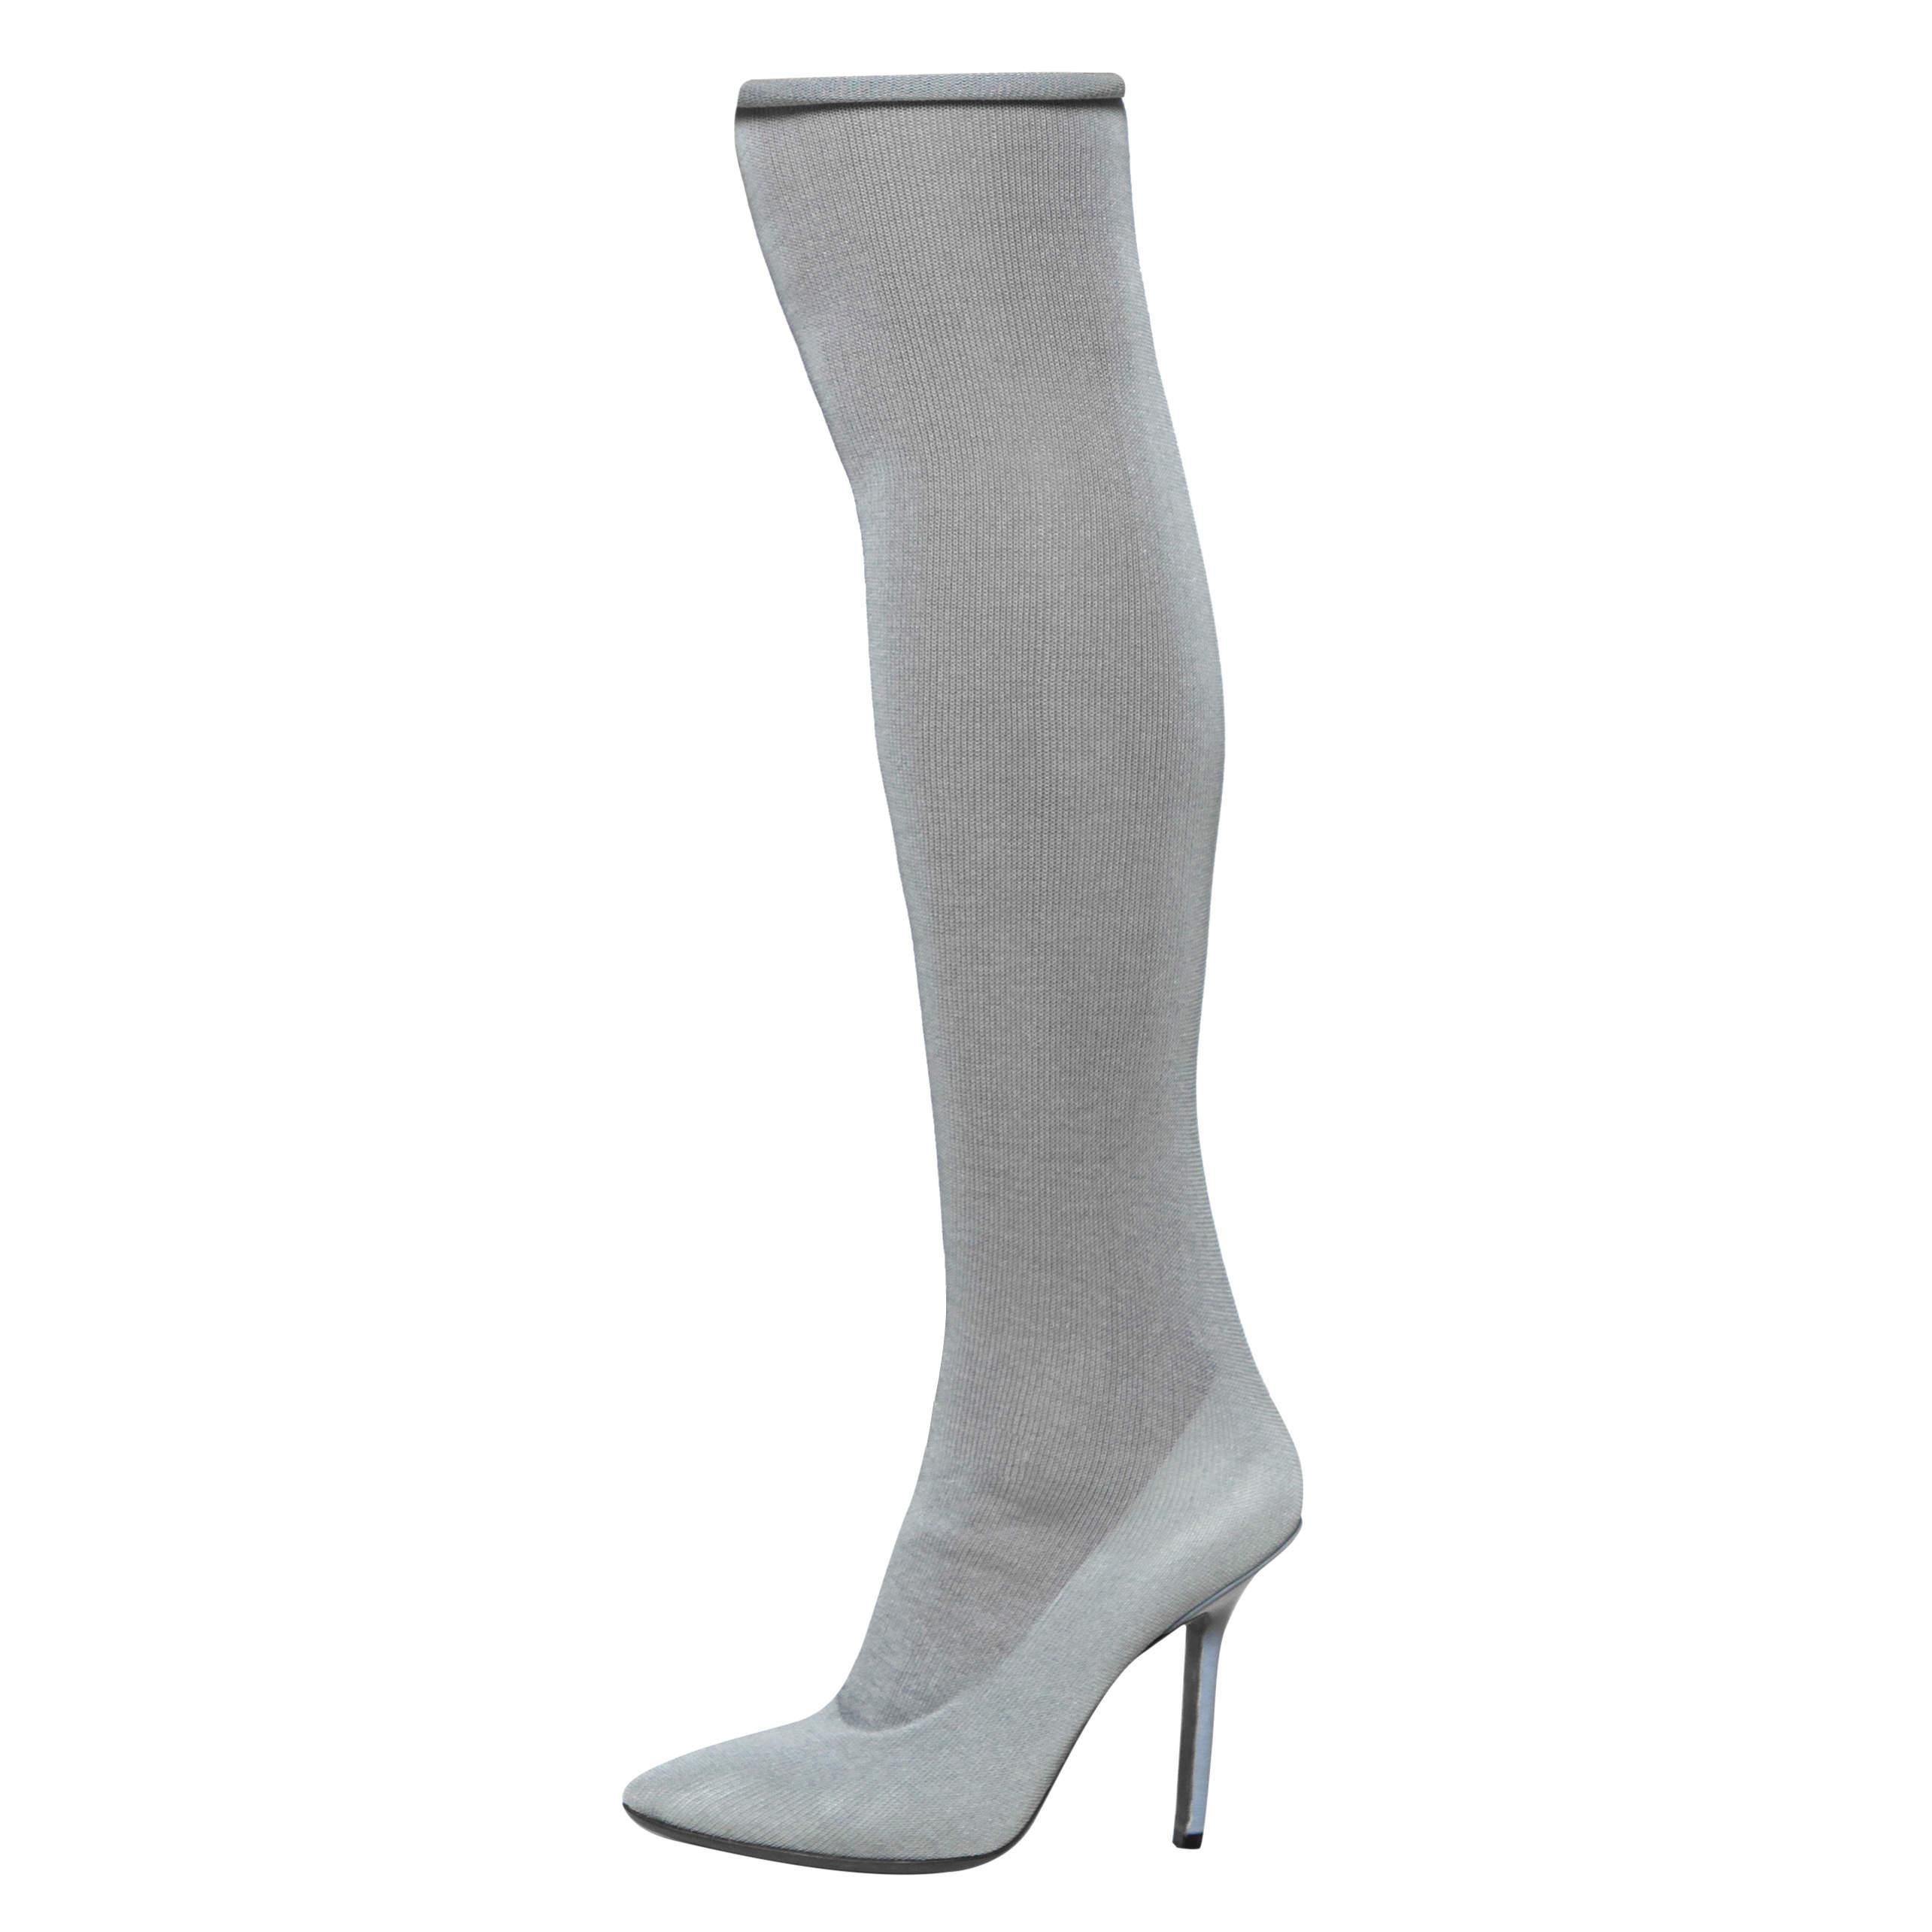 Vetements Grey Stretch Fabric Reflective Thigh High Socks Boots Size 37 For Sale